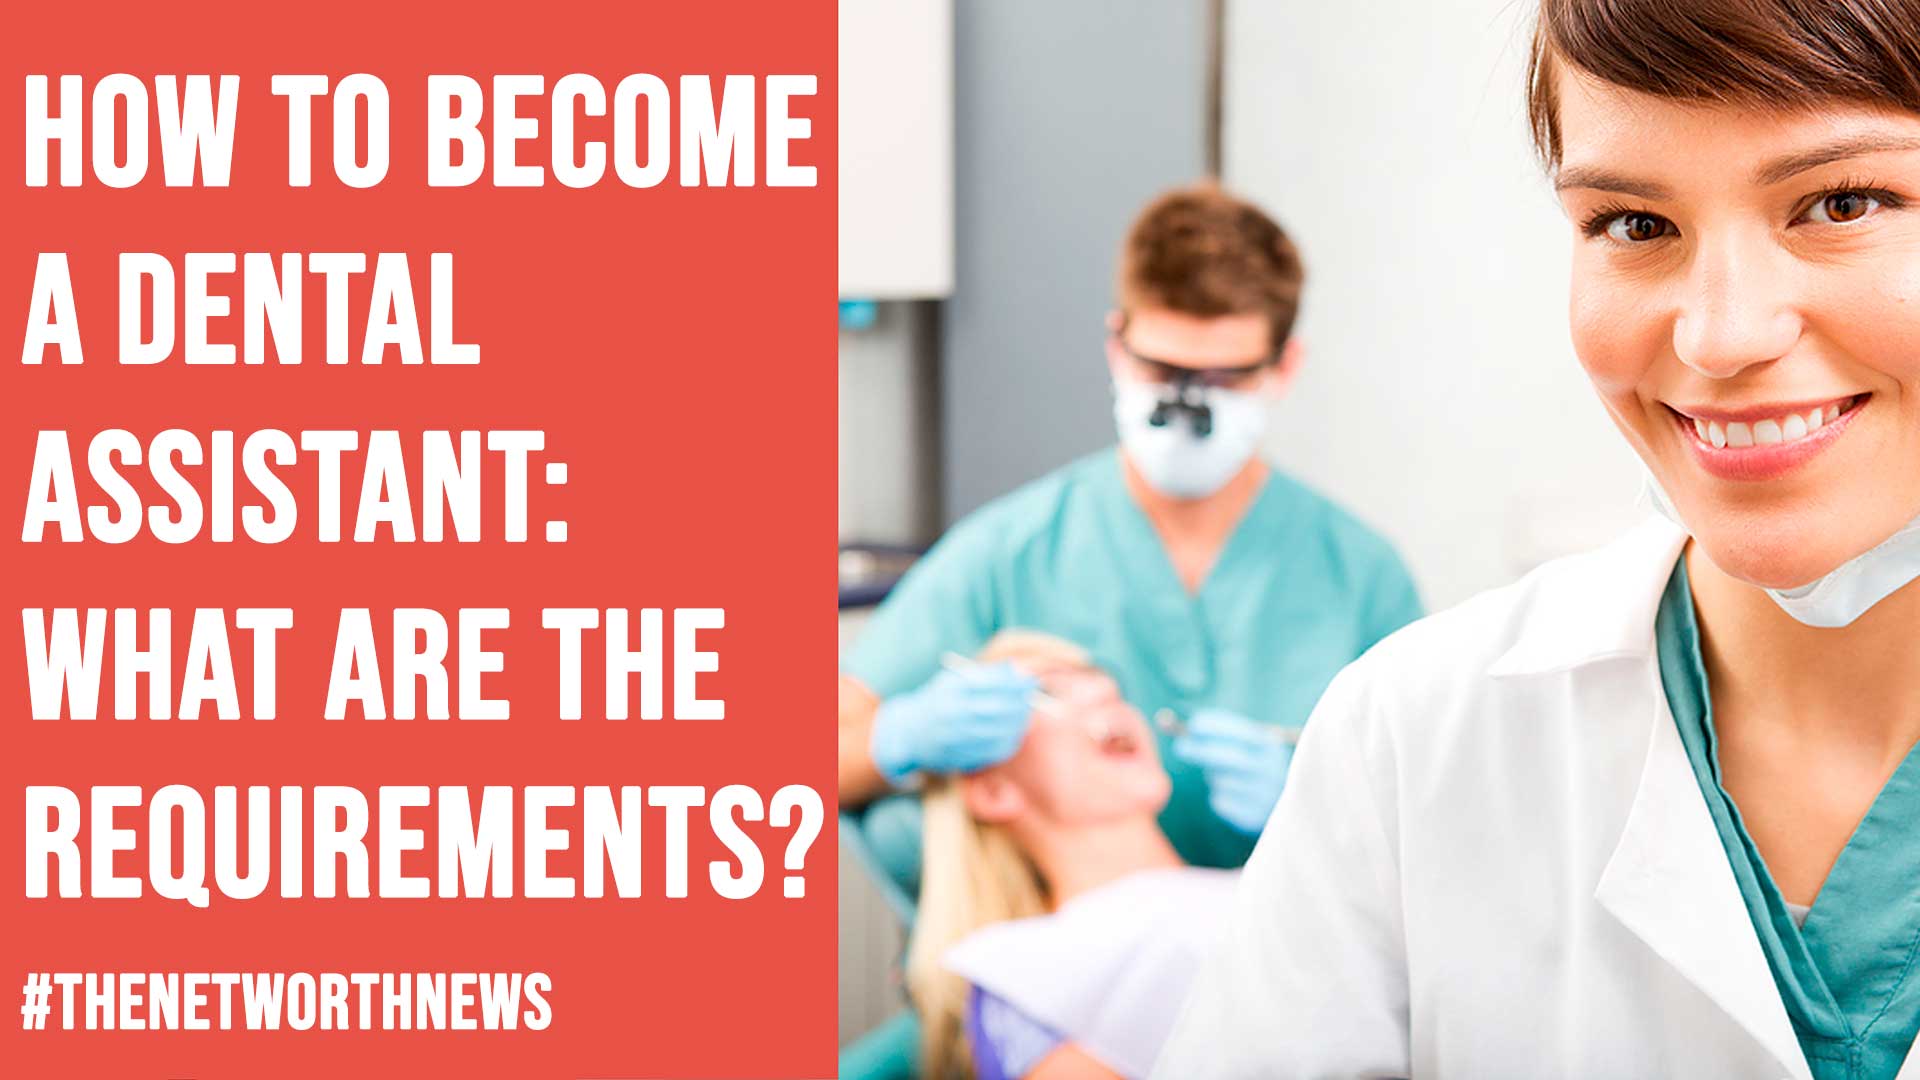 How to Become a Dental Assistant: What Are the Requirements?